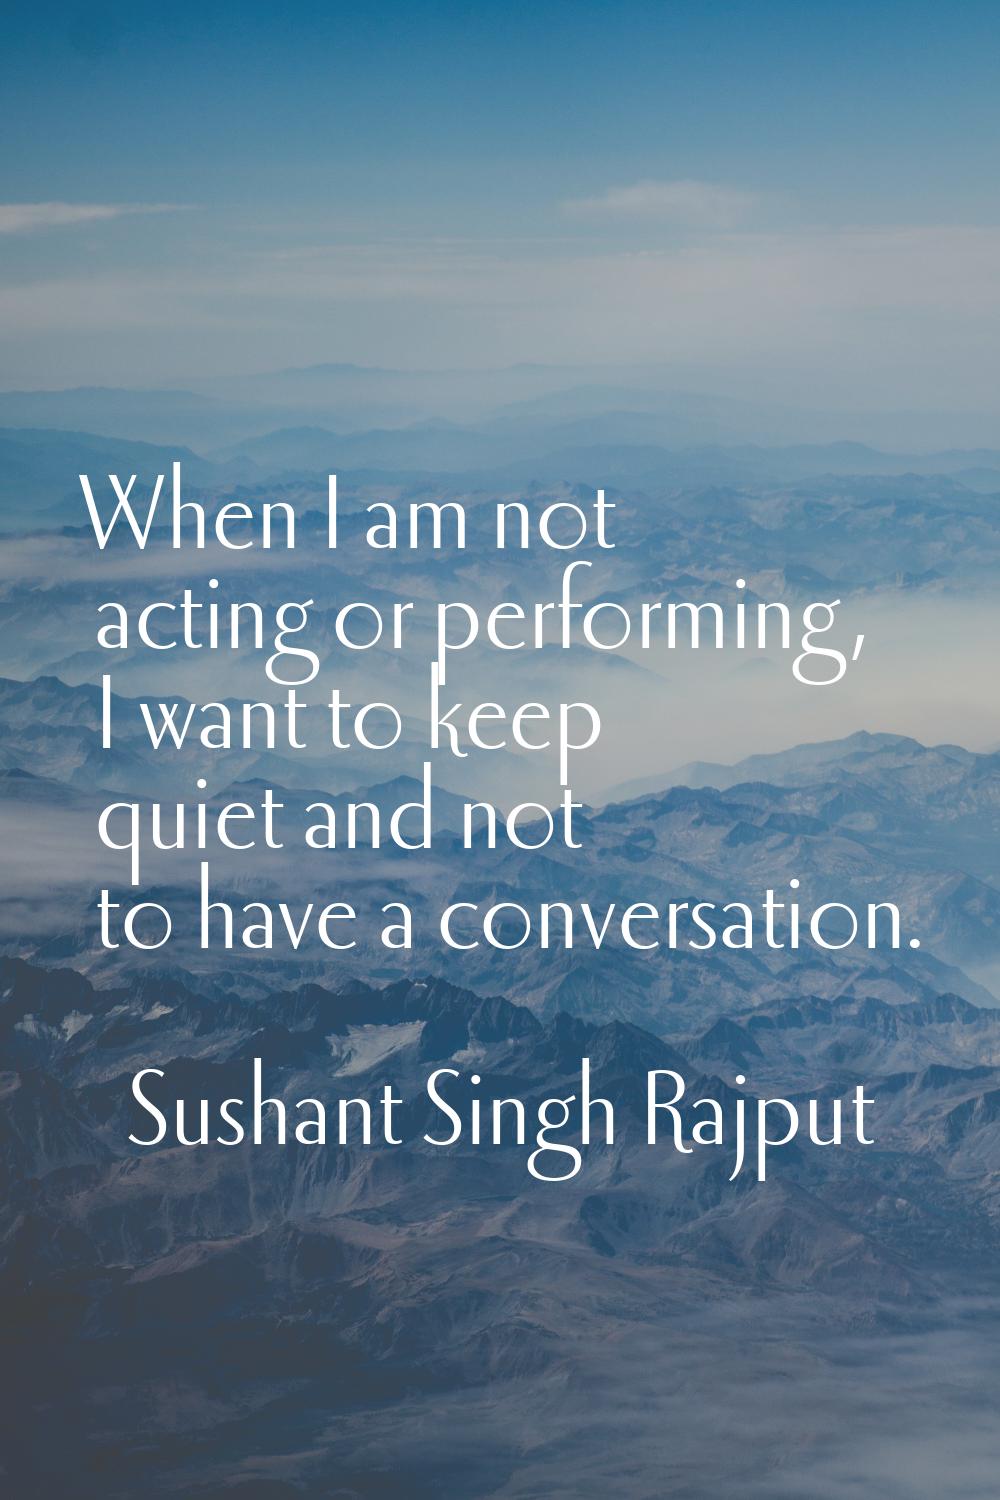 When I am not acting or performing, I want to keep quiet and not to have a conversation.